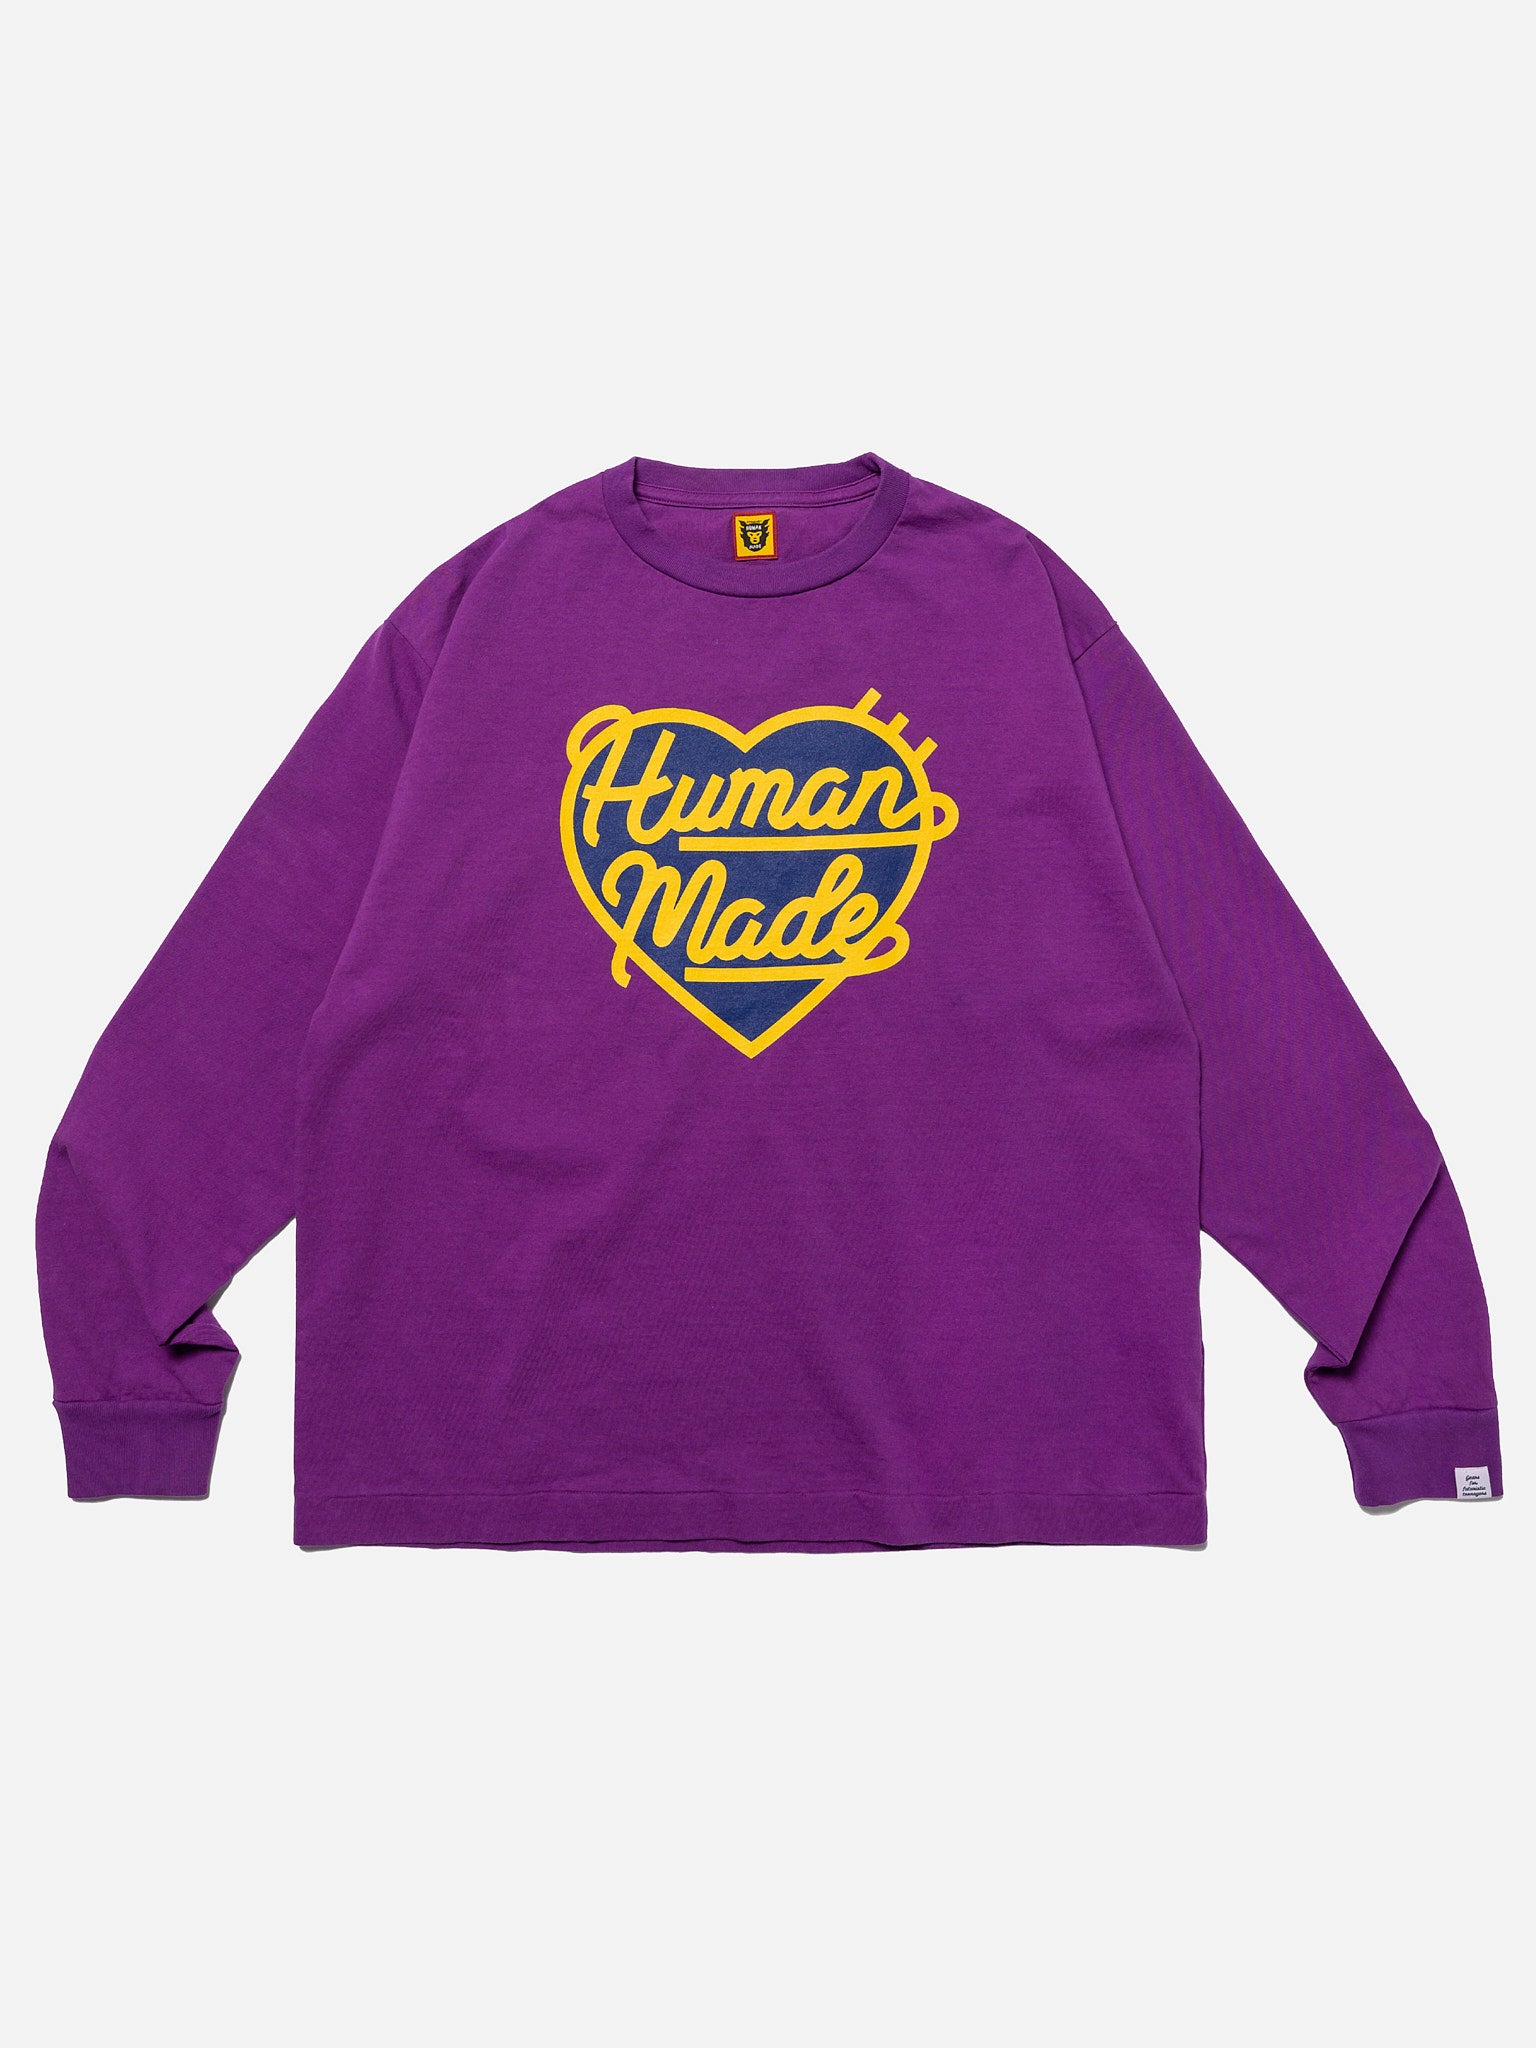 Human made GRAPHIC L/S T-SHIRT #4-